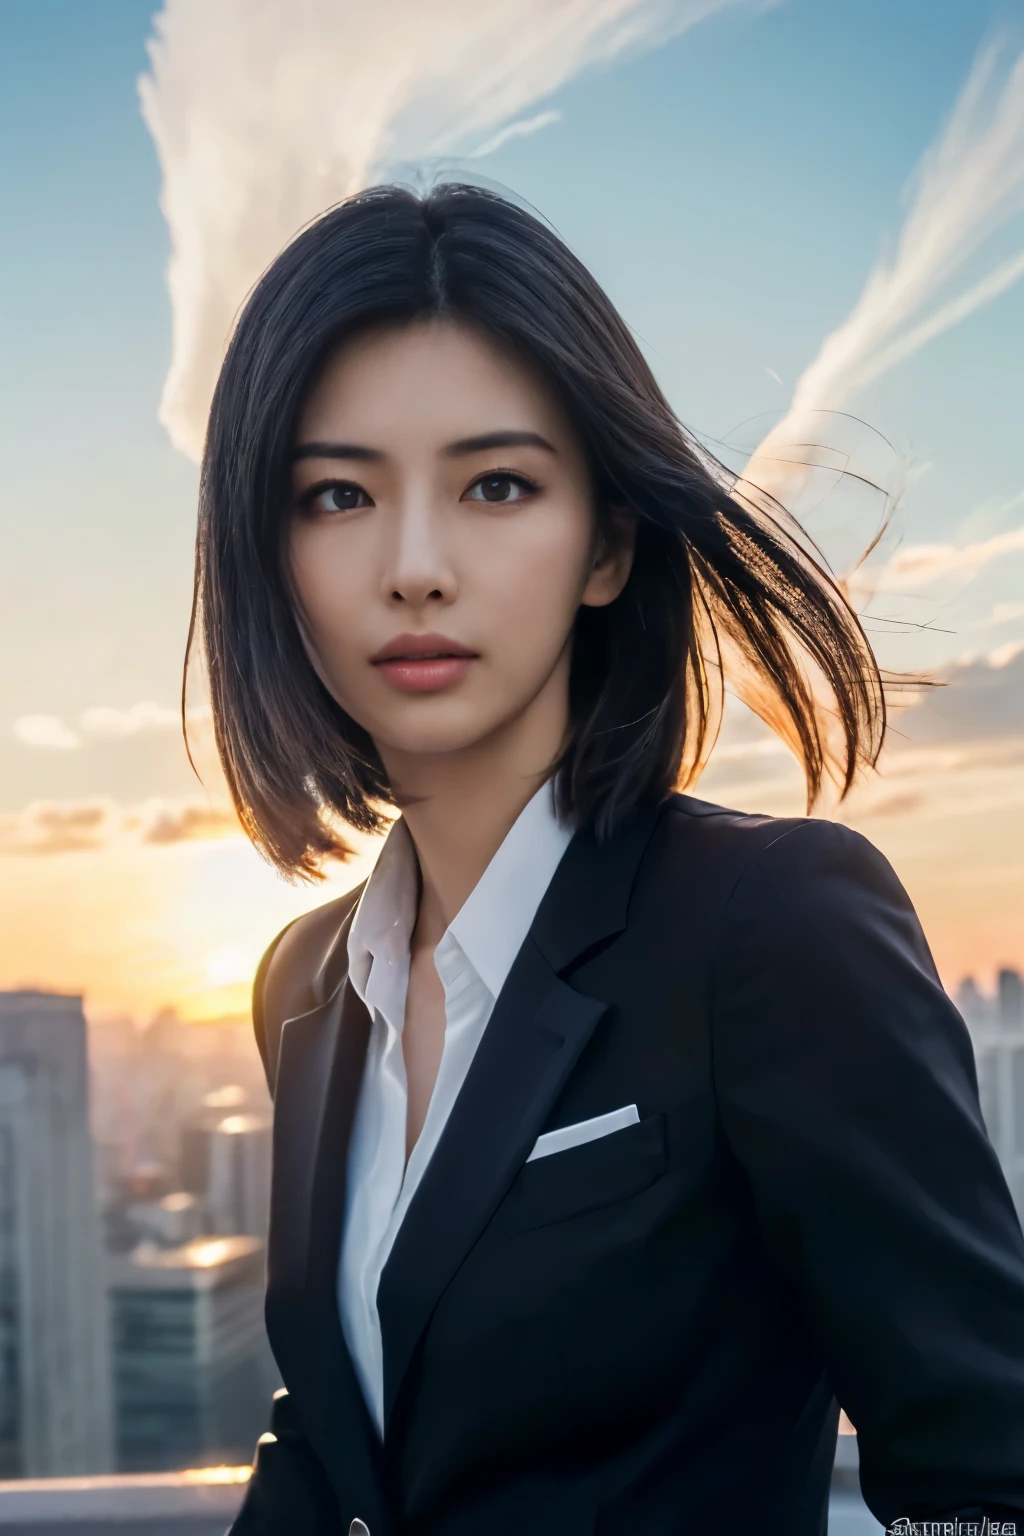 ((masutepiece:1.4, Best Quality)), (photos realistic:1.4), 
((1girl in)), Lustrous black hair, Hair that flutters in the wind,
(超A high resolution:1.2), Extremely delicate and beautiful, amazing, 
the Extremely Detailed CG Unity 8K Wallpapers, Ultra-detailed, High resolution, Soft light, 
Beautiful detailed girl, extremely detailed eye and face, beautiful detailed nose, Beautiful detailed eyes, 
(Dark blue business suit, skirt by the:1.4),
Cinematic lighting, Perfect Anatomy, Slender body, slender long legs, Taut,
(Glass-walled skyscrapers:1.3), (sunny winter blue sky:1.4), (Vivid sunset clouds:1.3), (Beautiful form with an inorganic atmosphere),
cool expression, Cowboy Shot